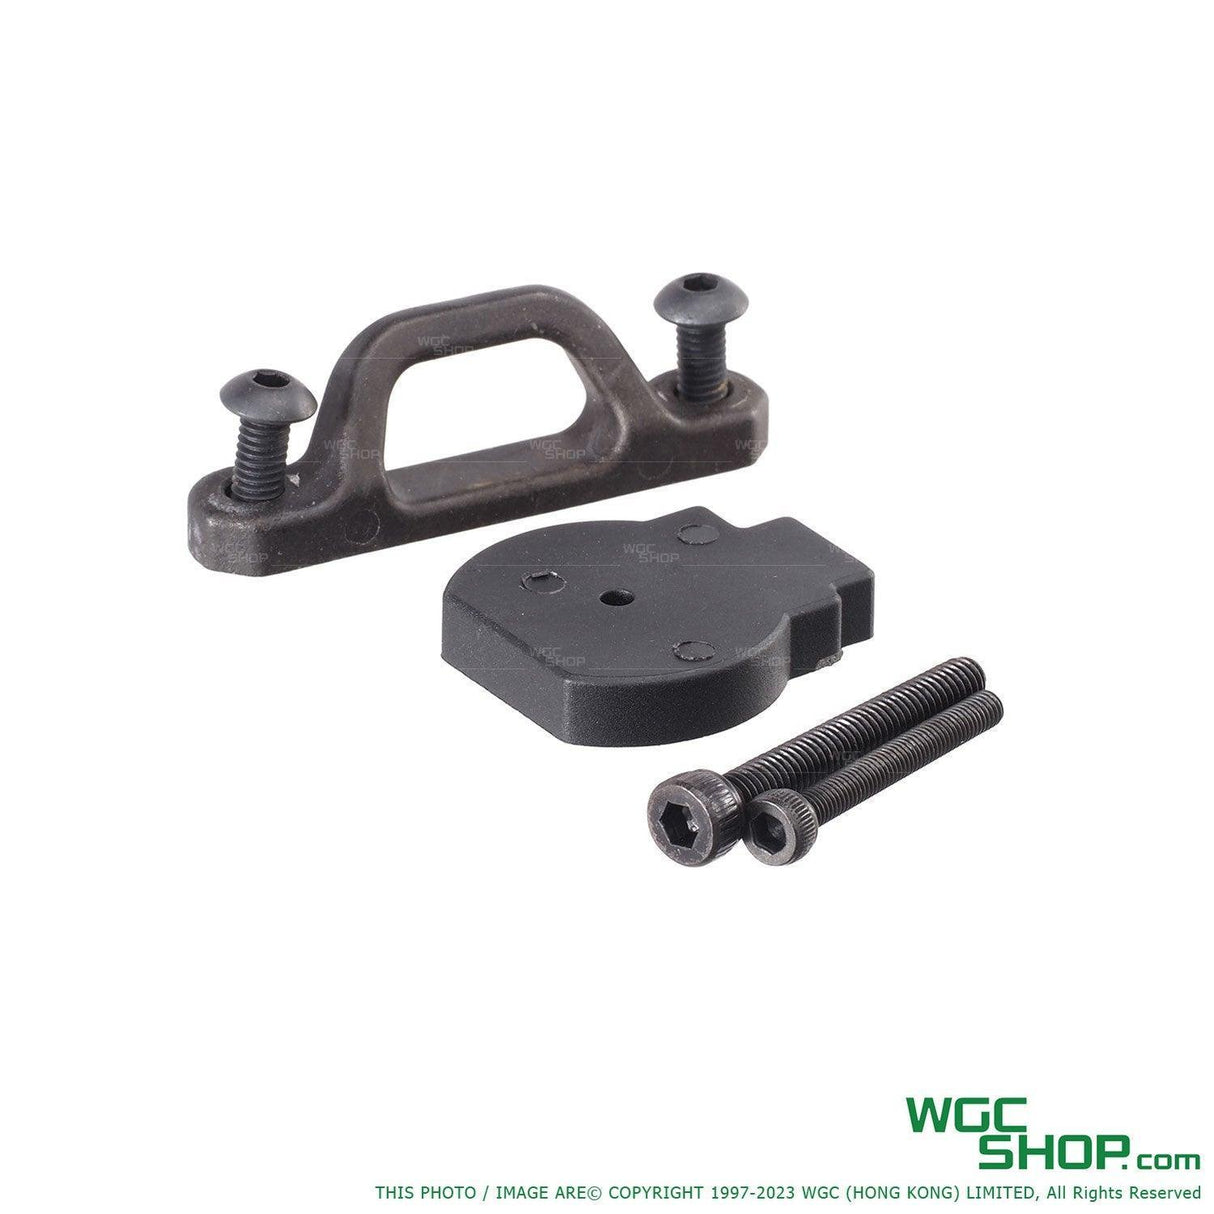 PTS Kinetic SAS Scar Adaptable Stock Kit for VFC SCAR-H GBB Airsoft - WGC Shop